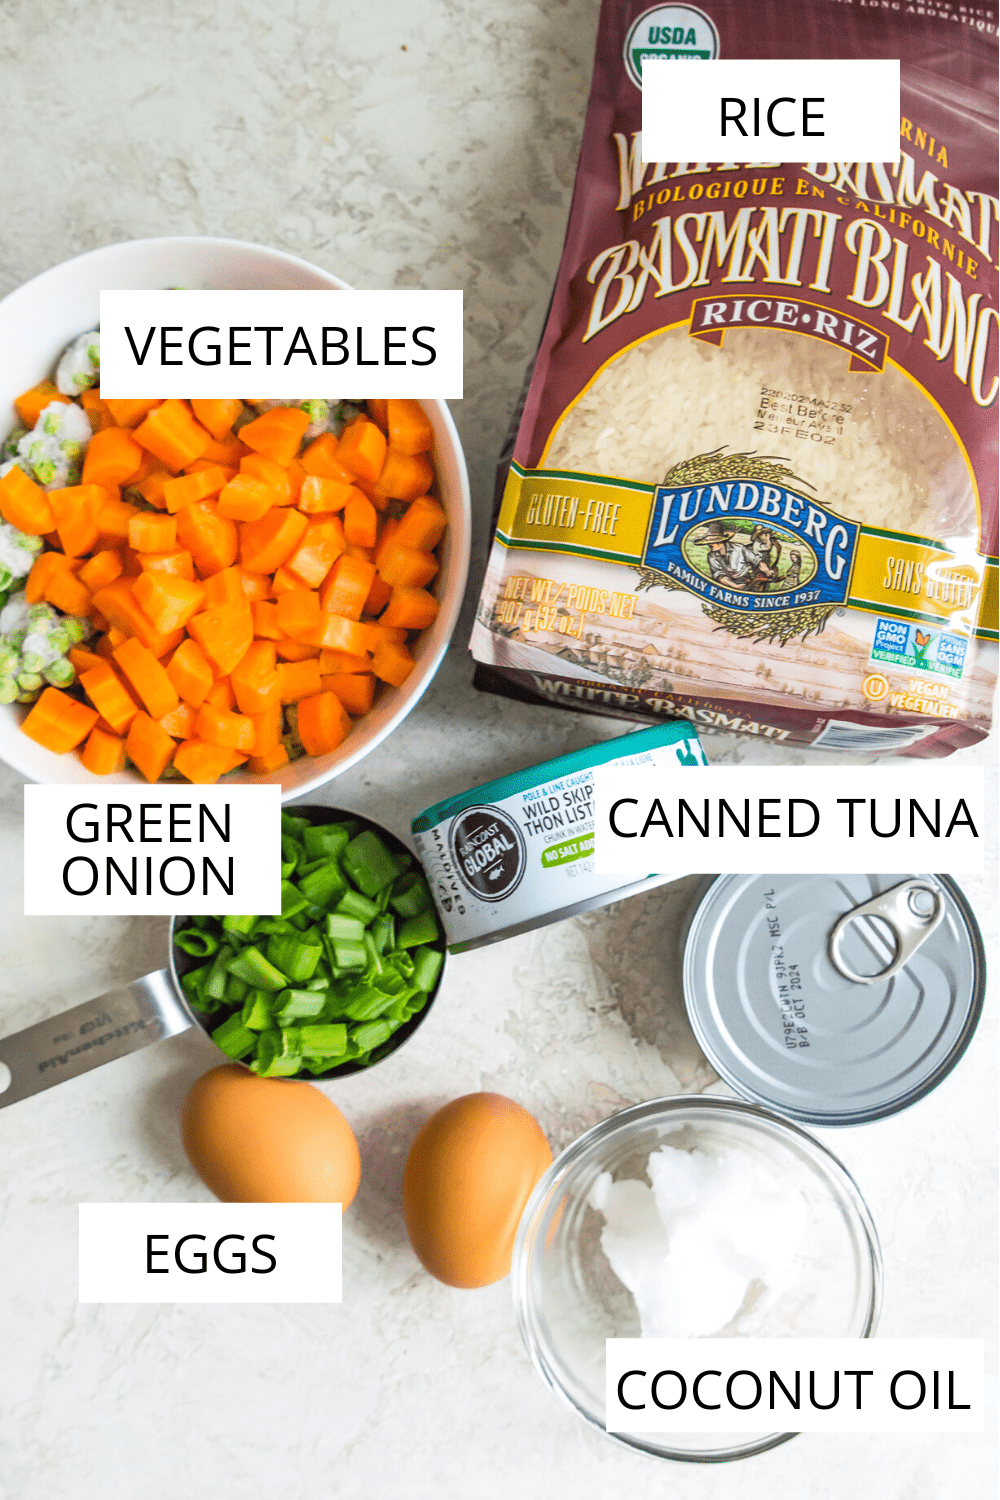 Ingredients needed to make tuna fried rice including vegetates, white rice and canned tuna.